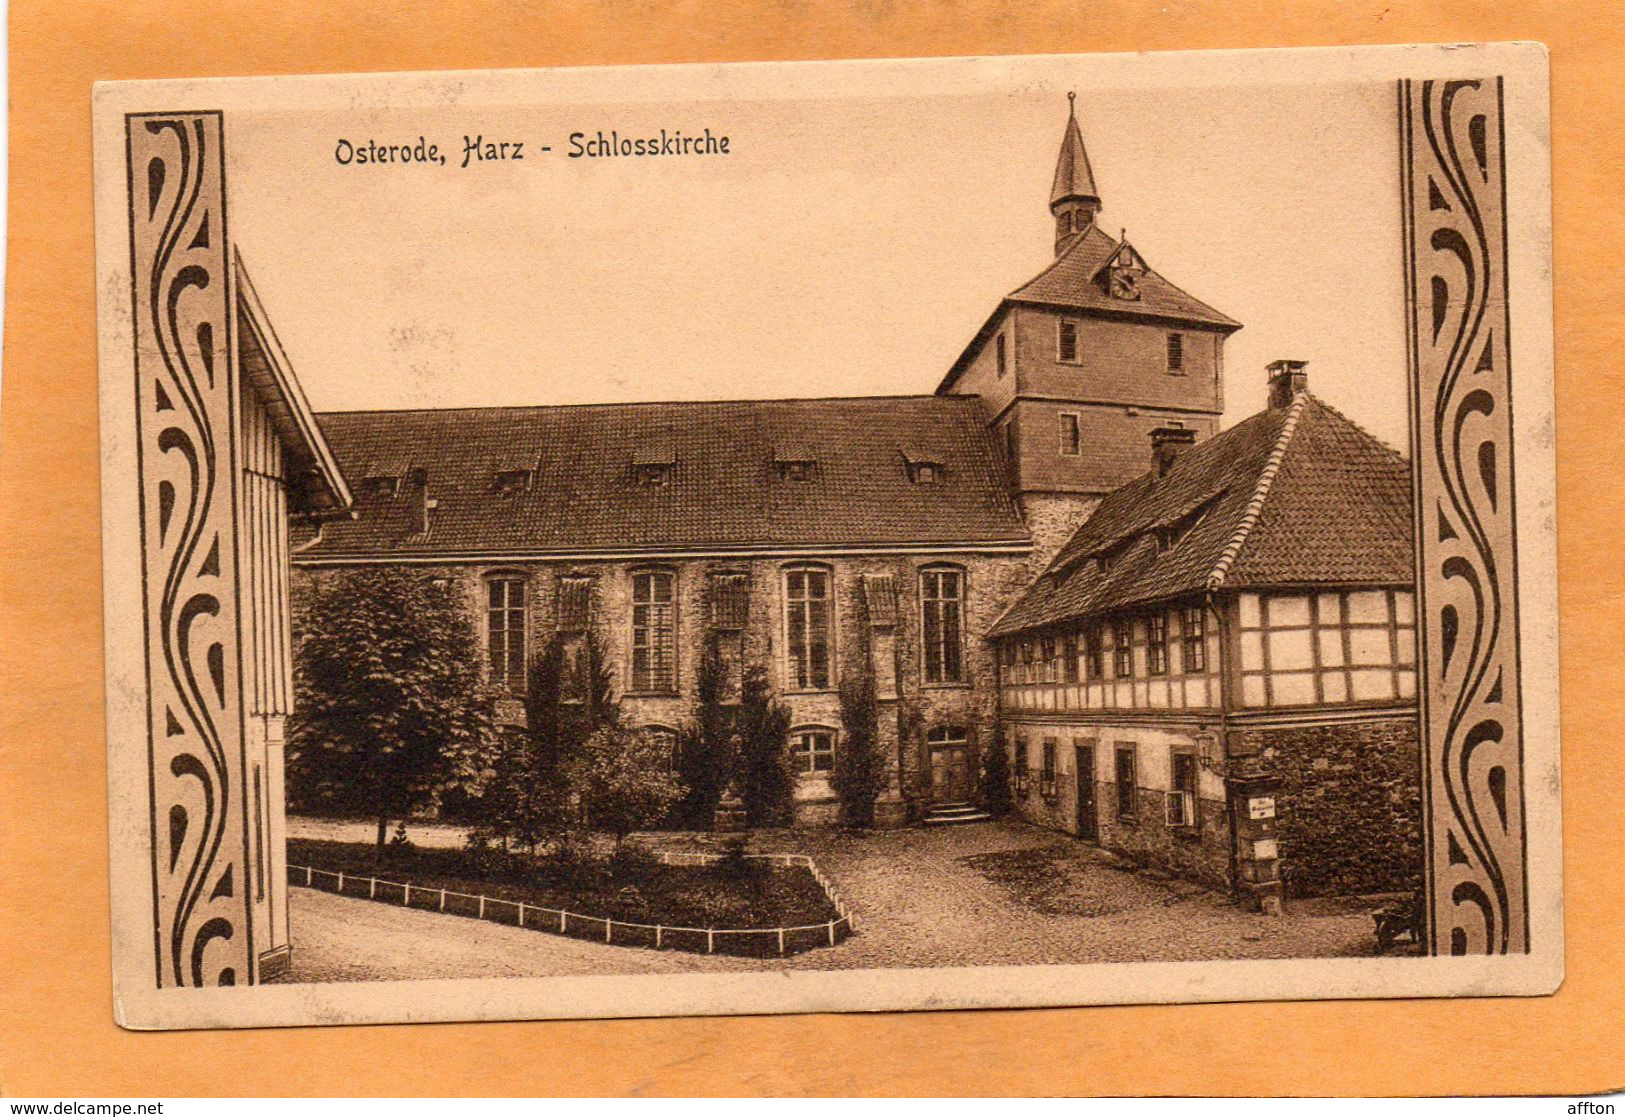 Osterode Am Harz Germany 1908 Postcard - Osterode